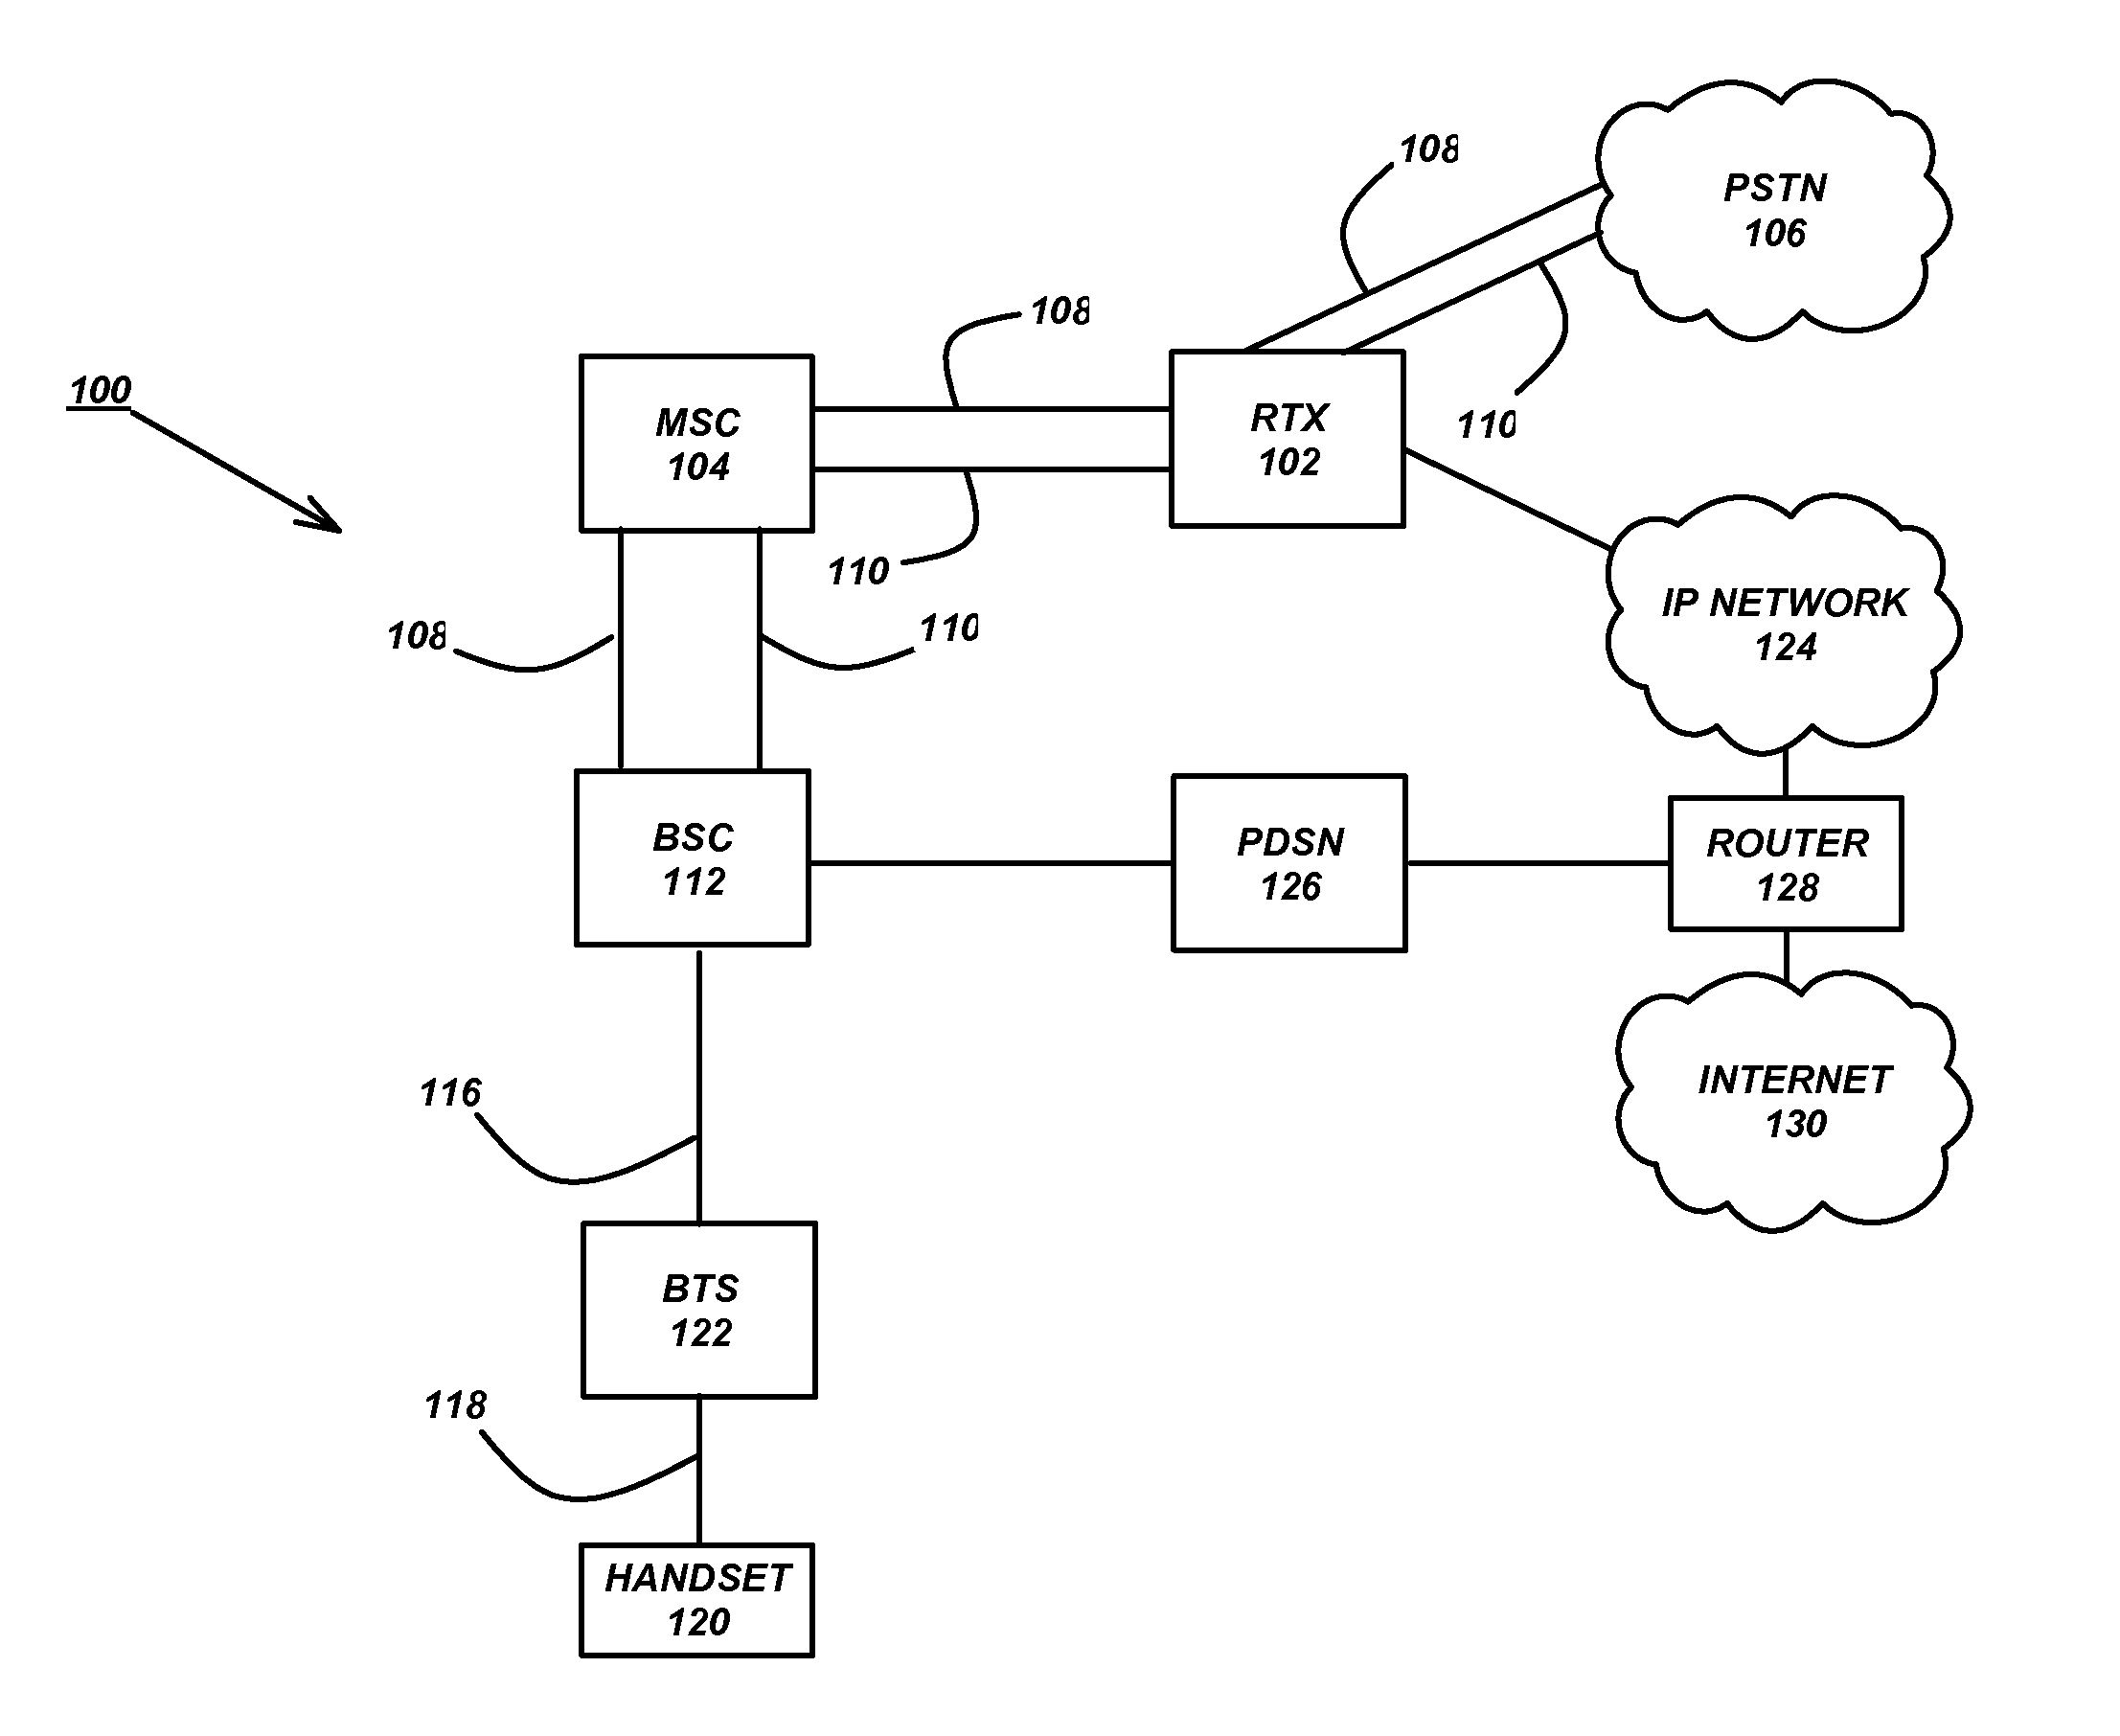 Architecture, client specification and application programming interface (API) for supporting advanced voice services (AVS) including push to talk on wireless handsets and networks